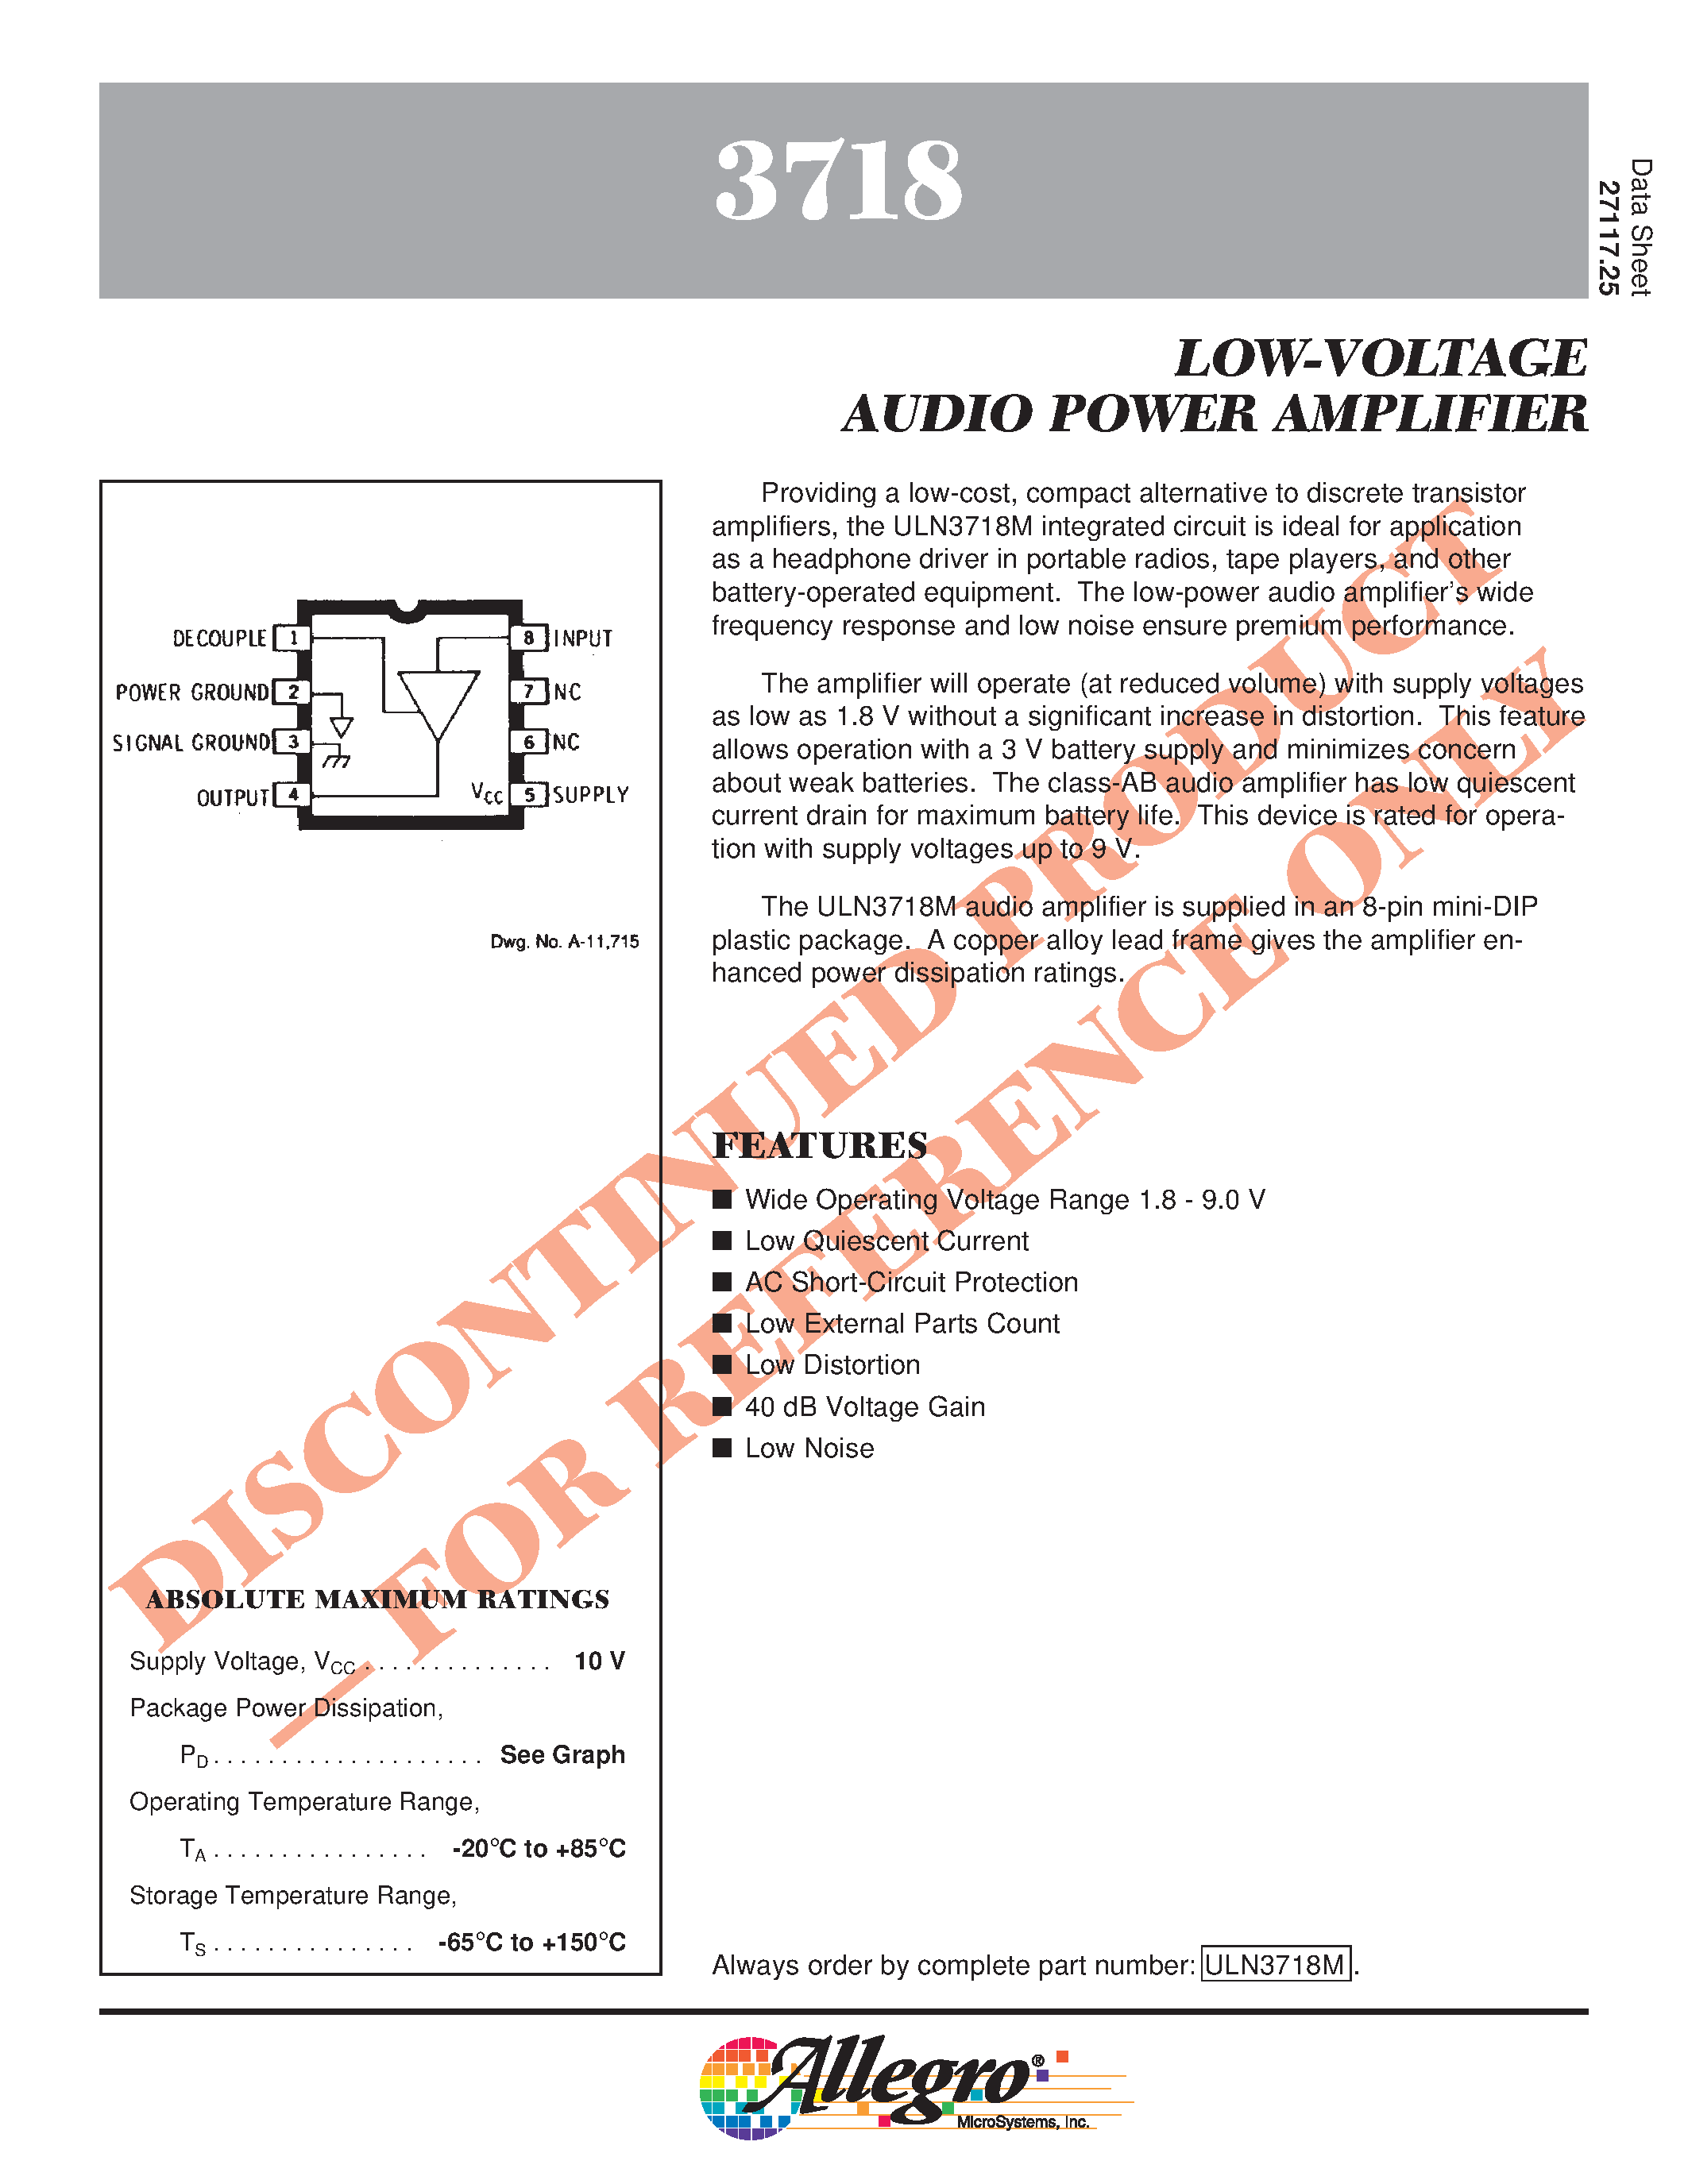 Datasheet ULN3718 - LOW-VOLTAGE AUDIO POWER AMPLIFIER page 1